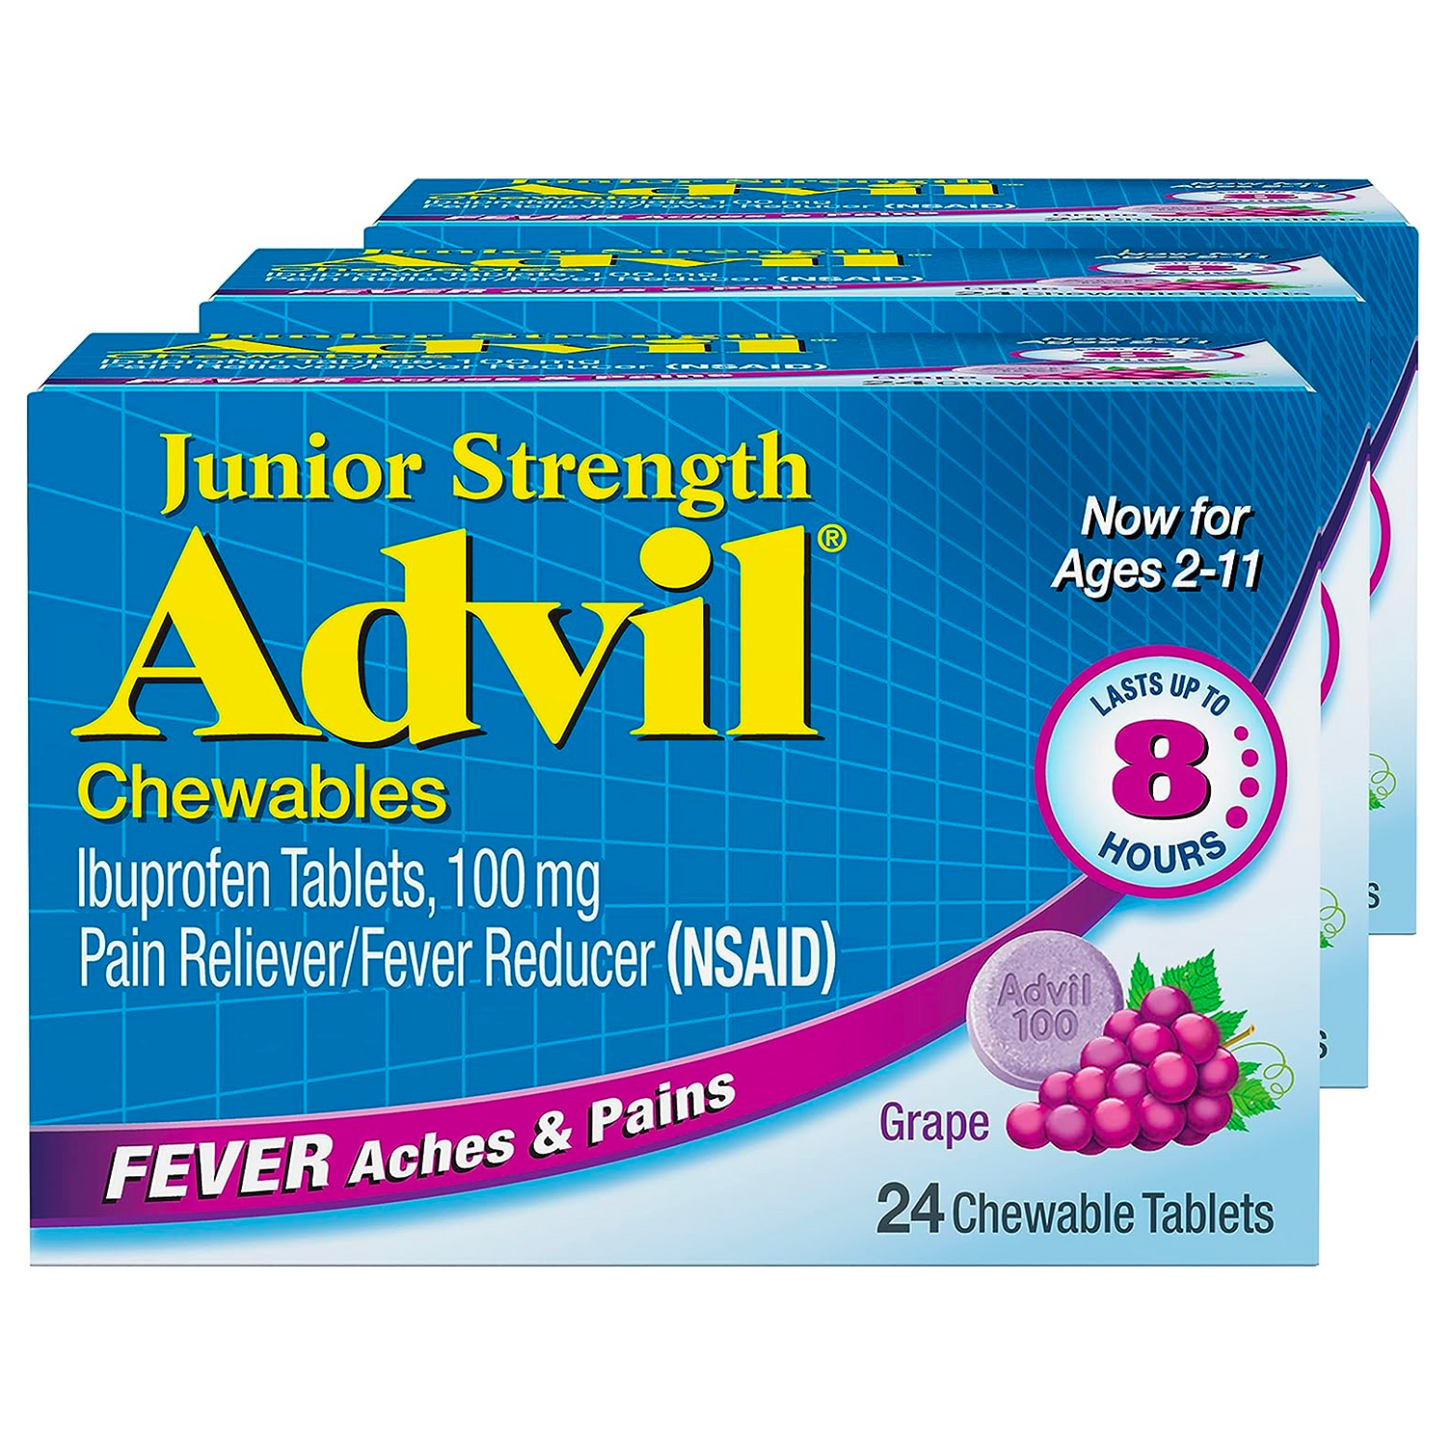 Advil Junior Strength - Chewable Children's Ibuprofen for Pain Relief and Fever Reducer - Grape - 24 Tablets (Pack of 3)